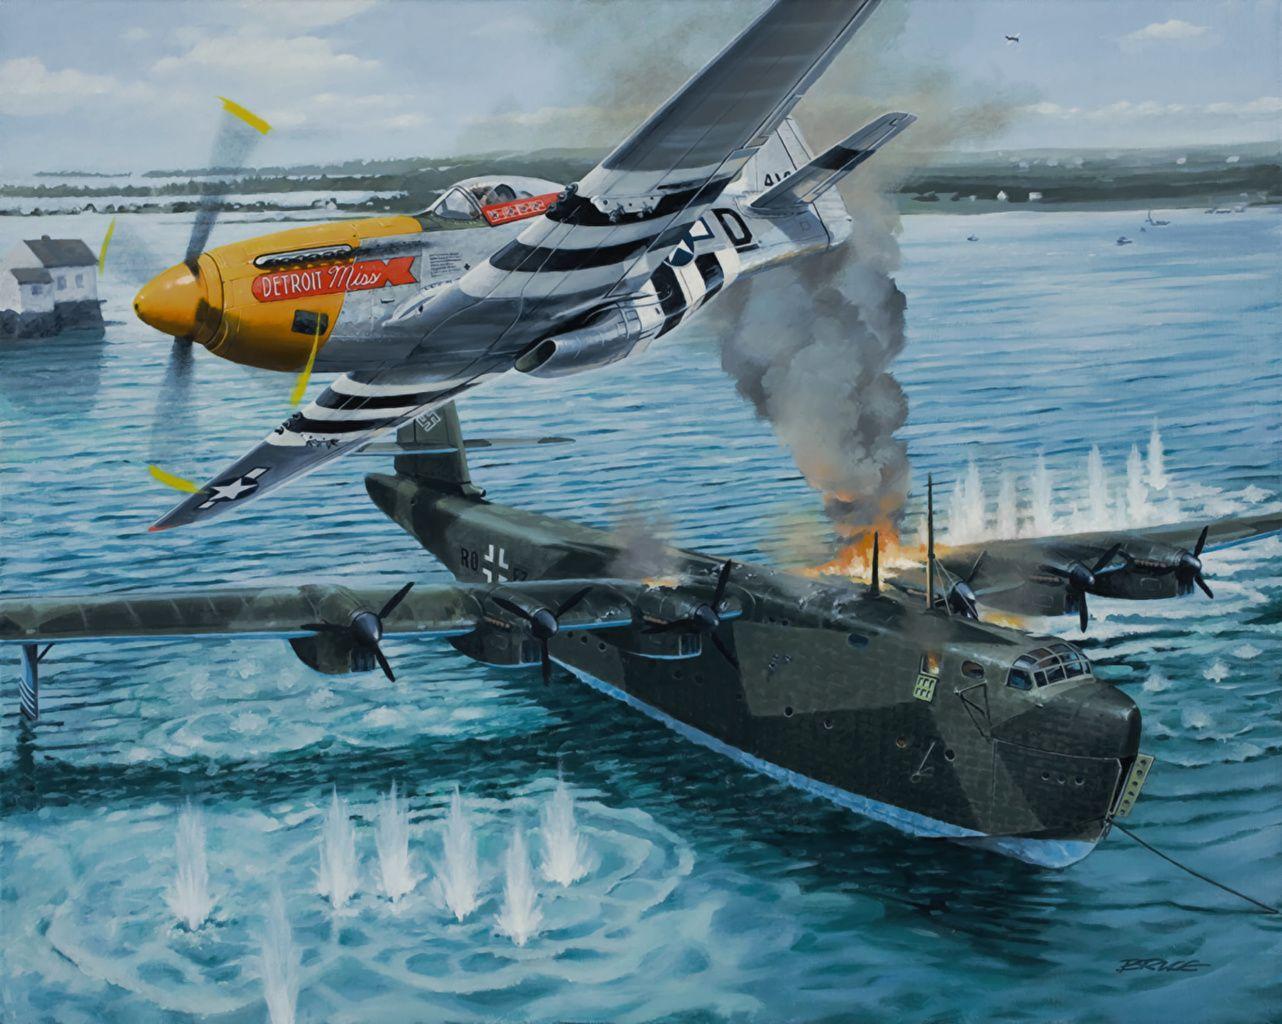 image Airplane P 51 D mustang ww2 Voss Bv 222 'Wiking' Painting Art